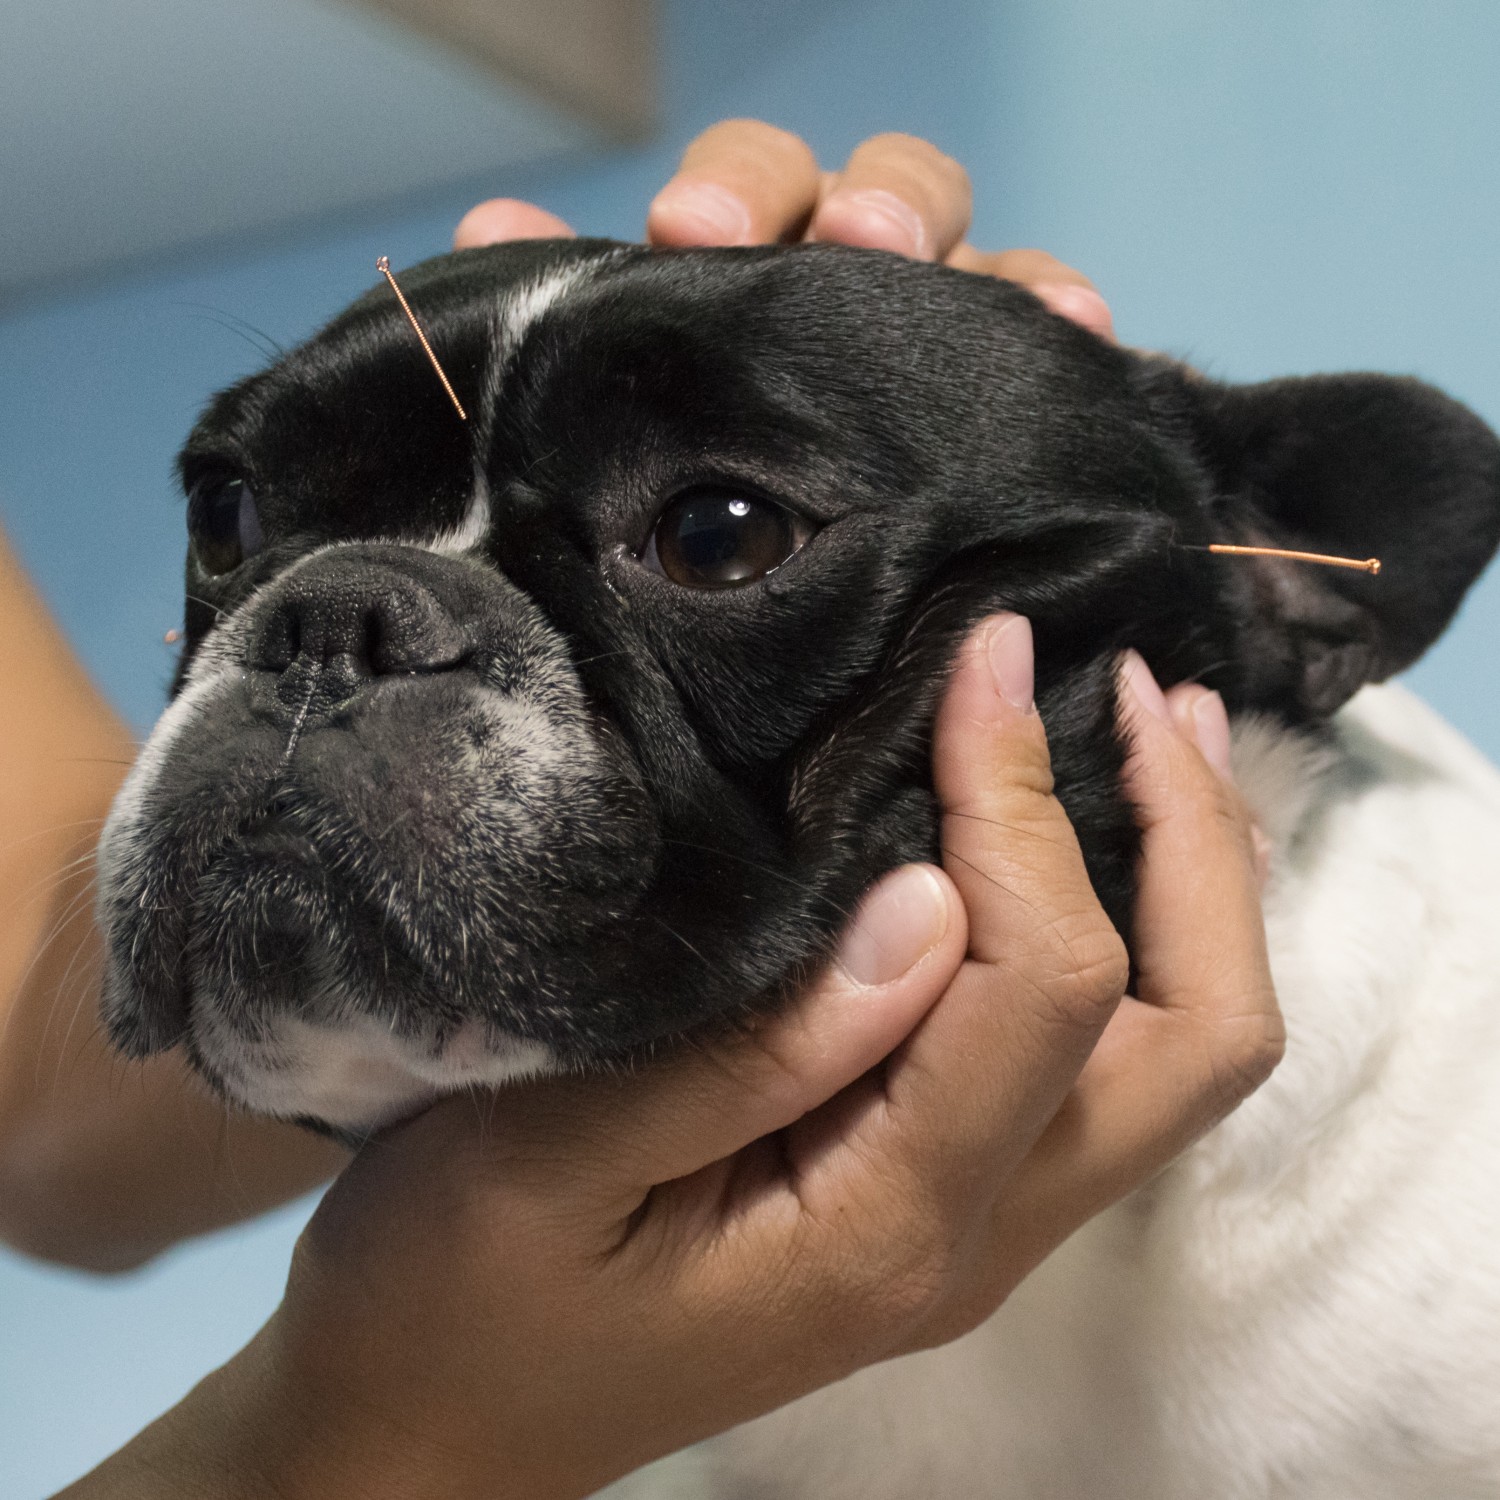 Dog Receiving Acupuncture